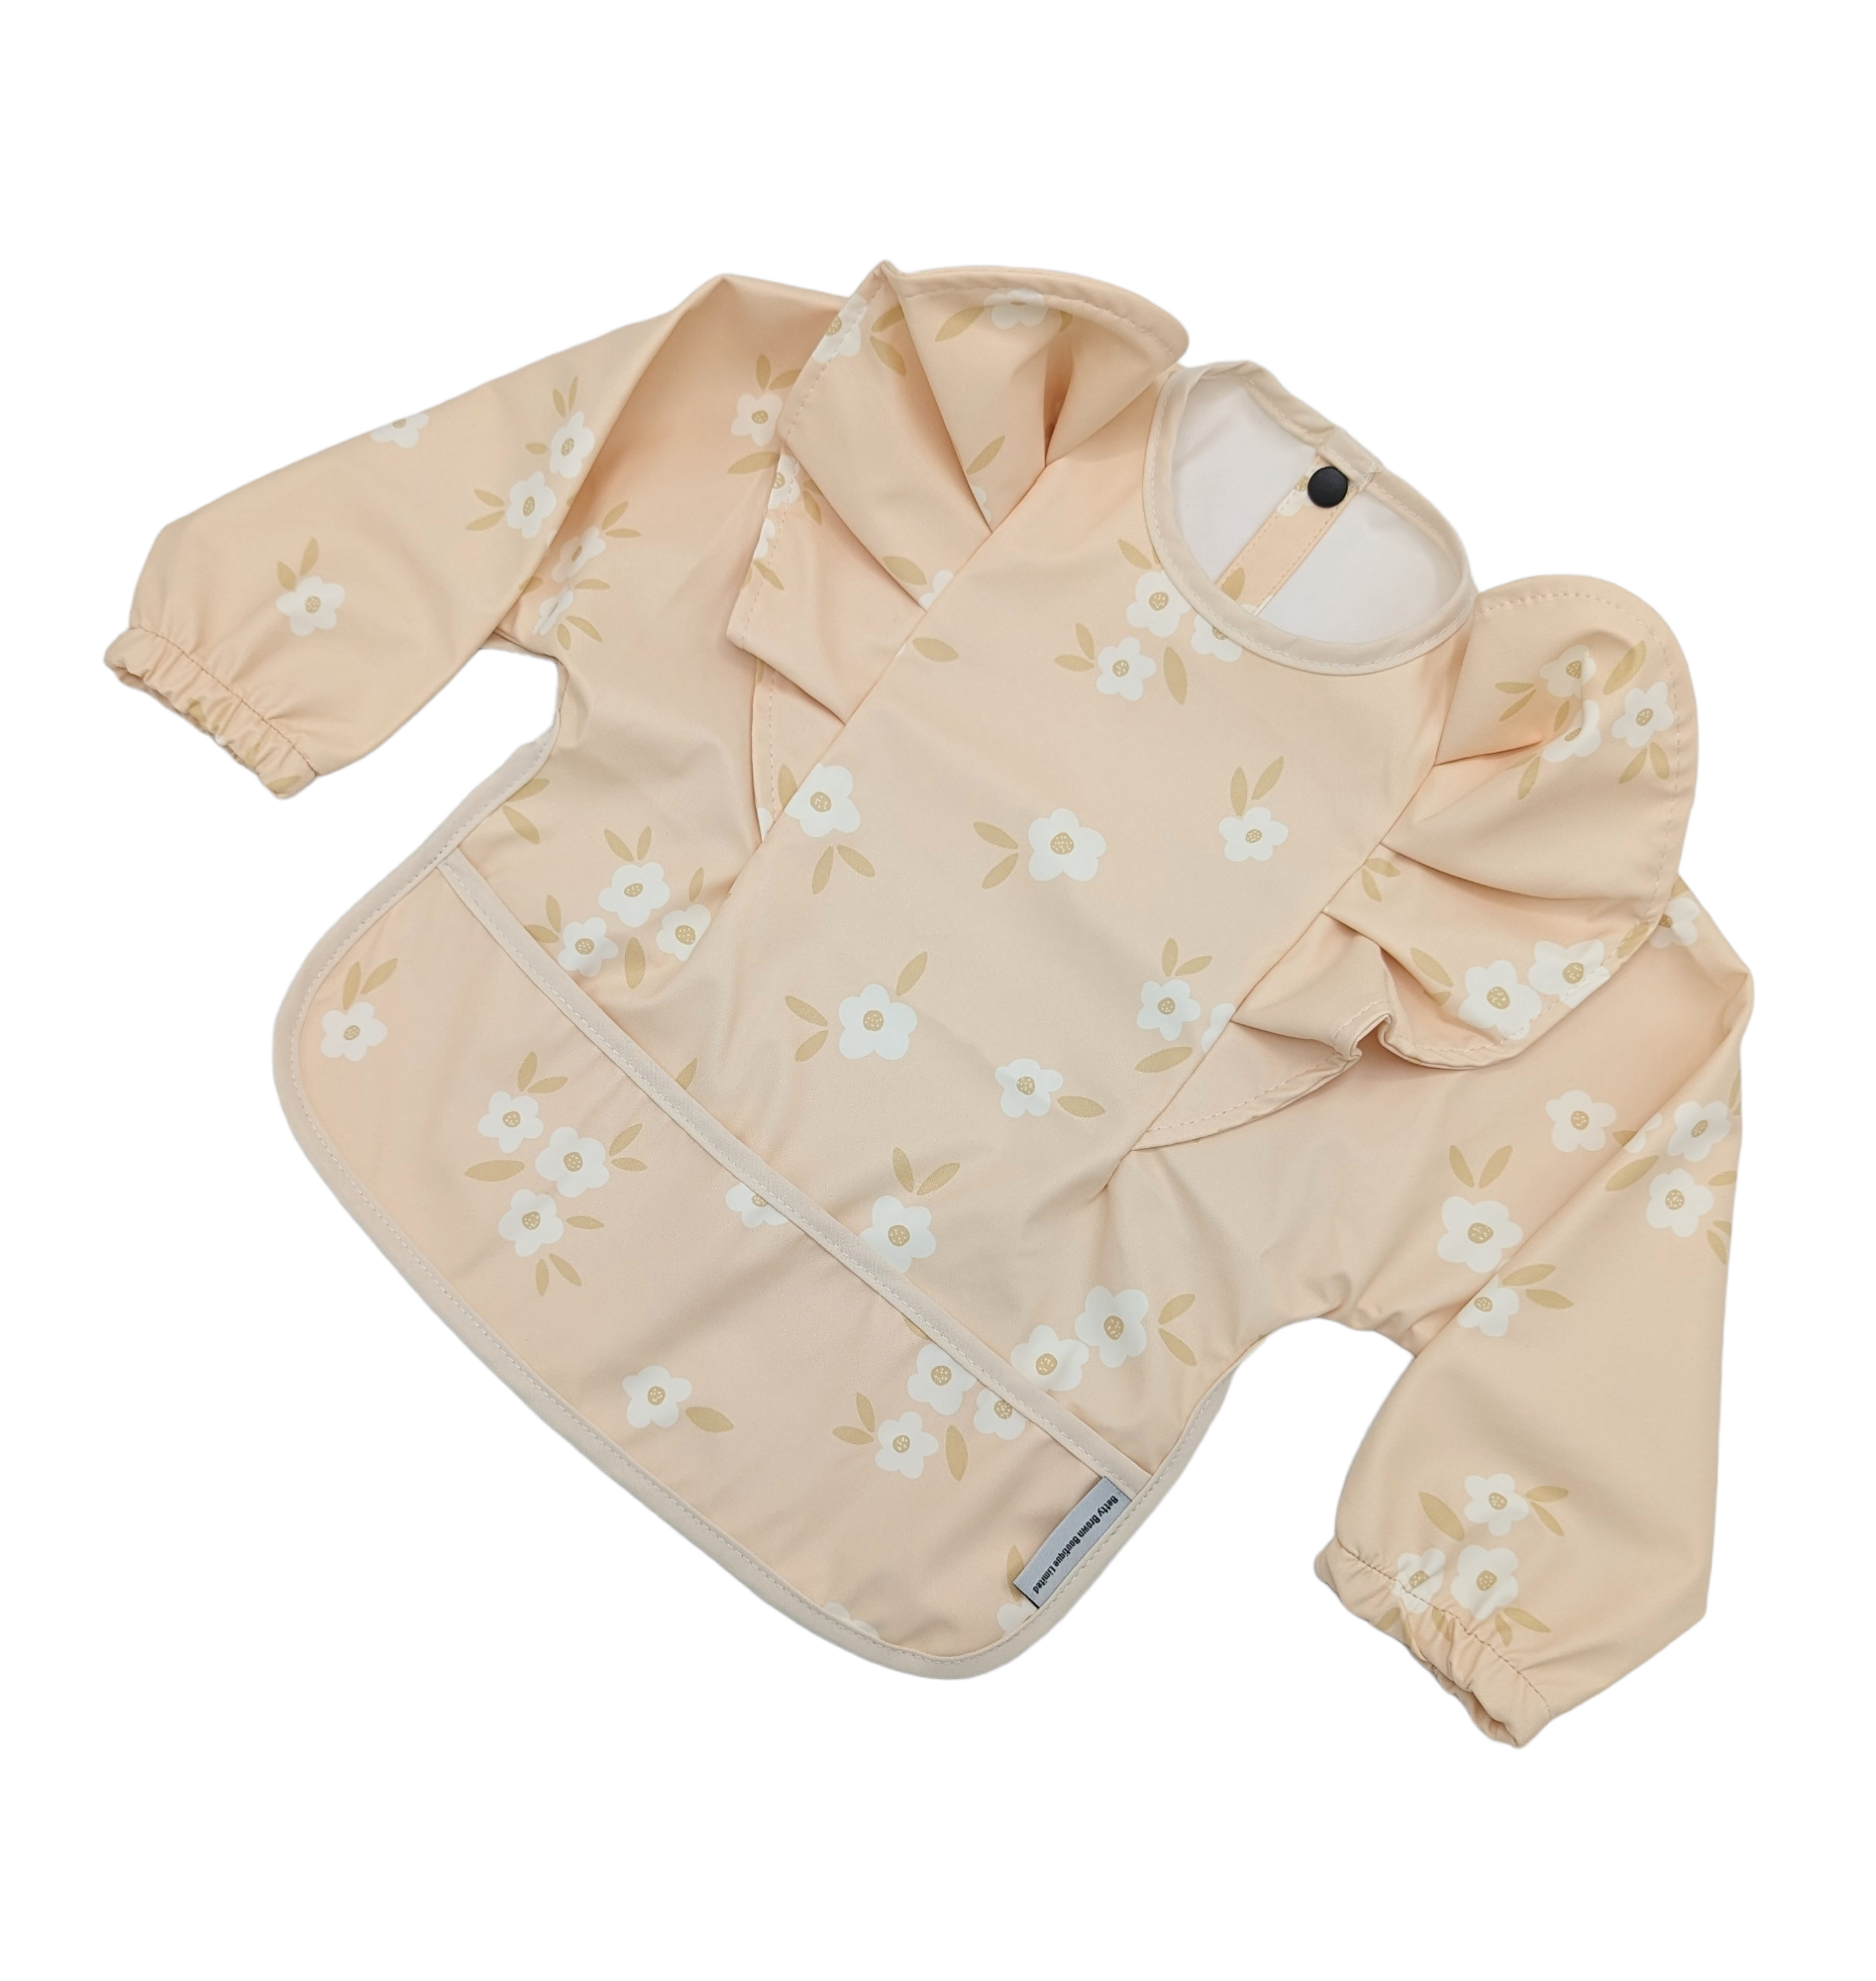 Peach Ditsy Floral Print Frill Detail Waterproof Bib with sleeves - Betty Brown Boutique Ltd